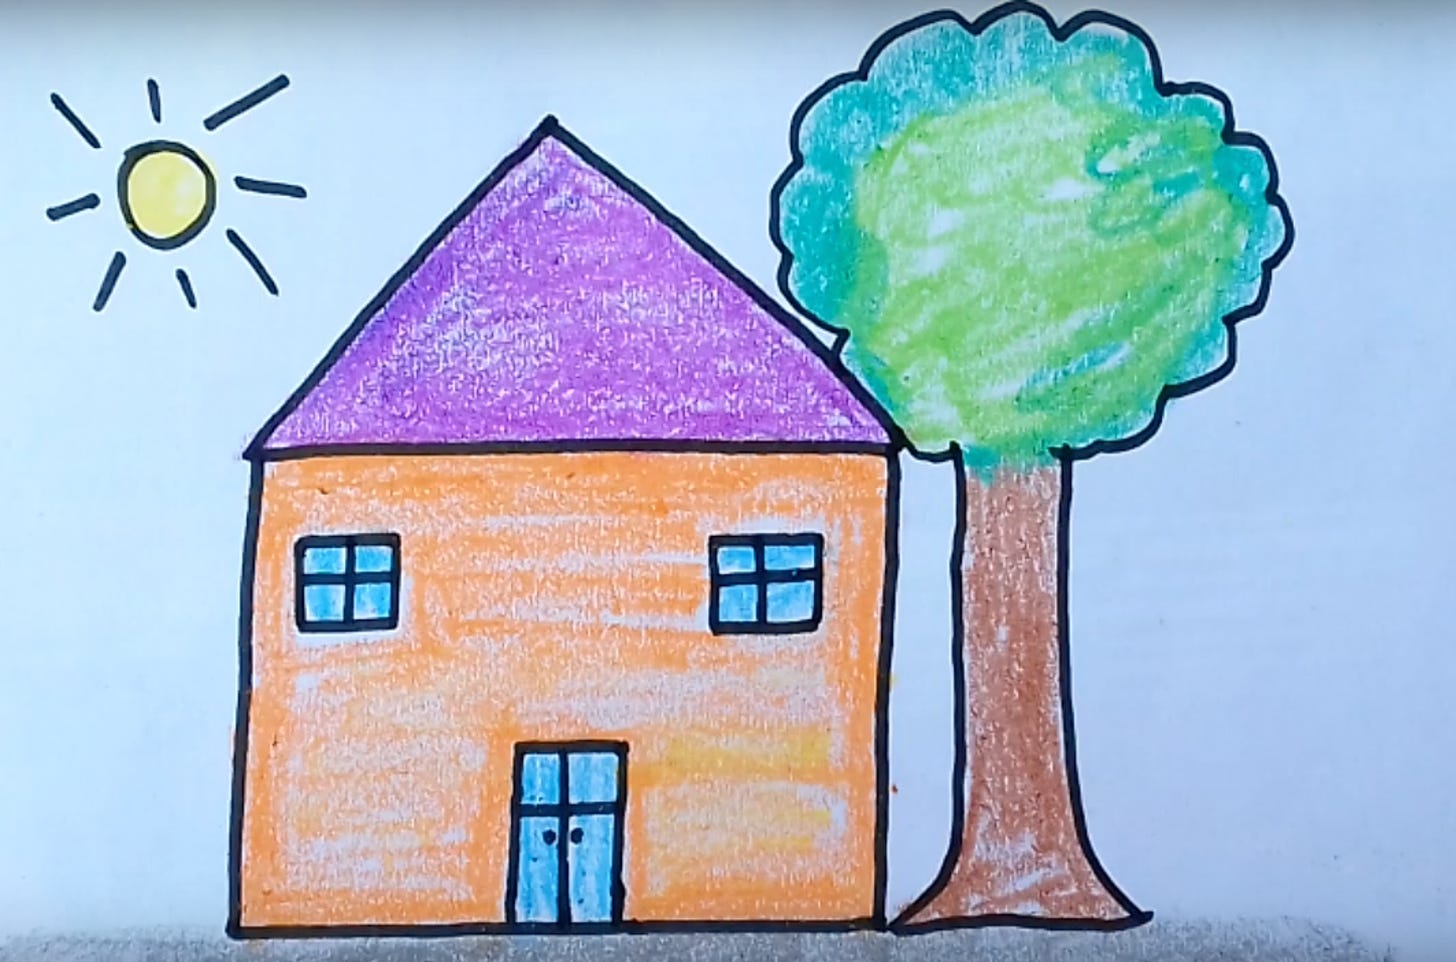 A child's line drawing of a house with one door and two windows. To its left is a big yellow sun and to its right is a tree.